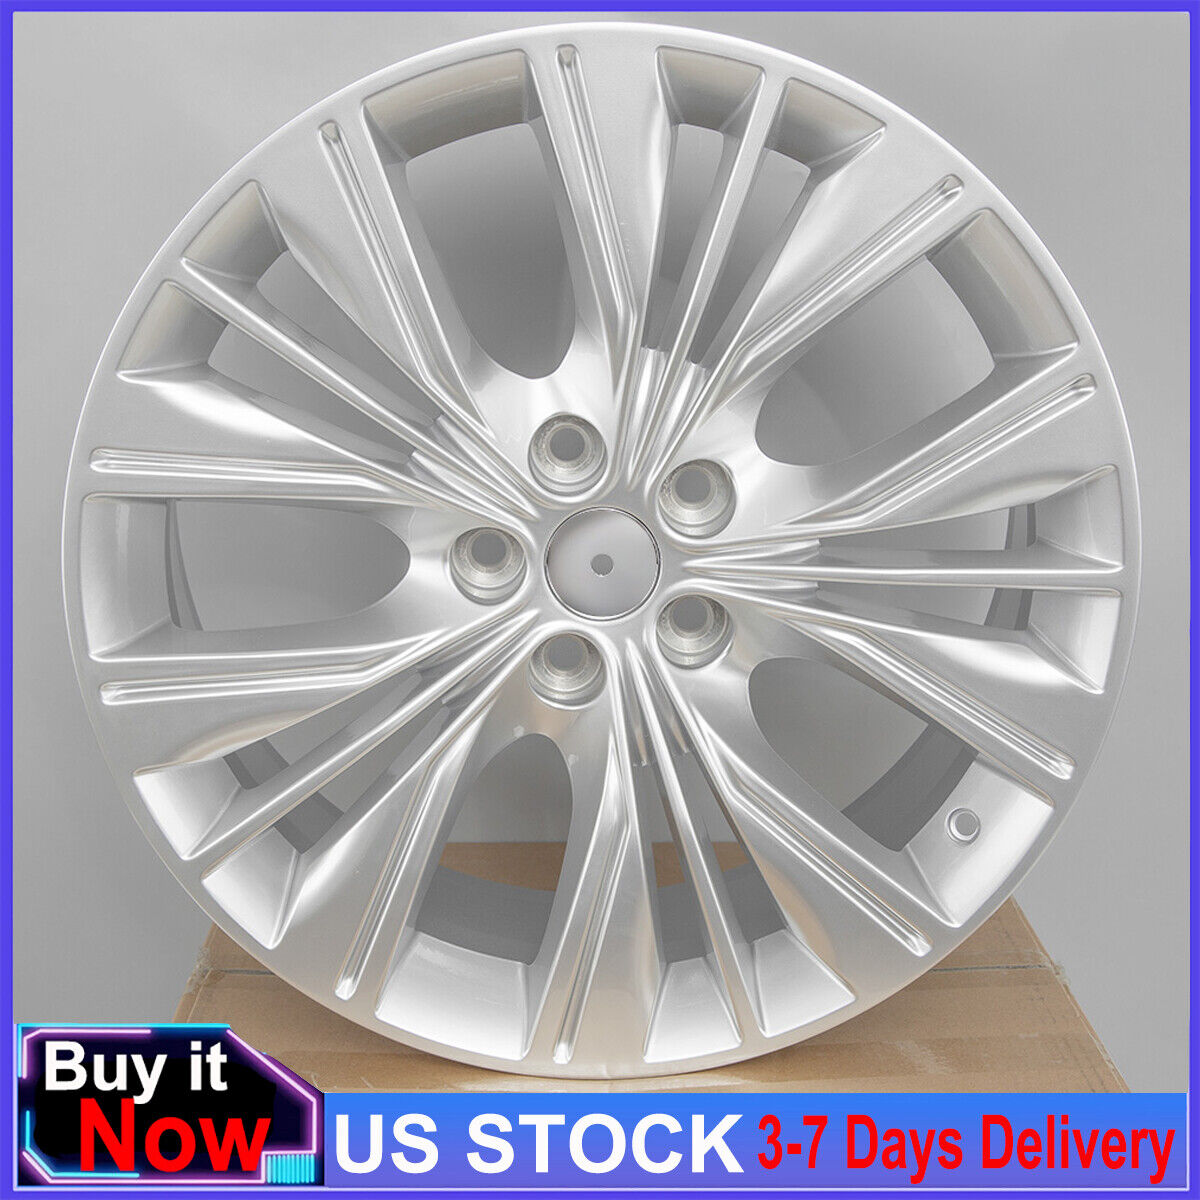 FOR 2014-2020 CHEVROLET IMPALA NEW 20 X 8.5 INCH REPLACEMENT RIM WHEEL SILVER